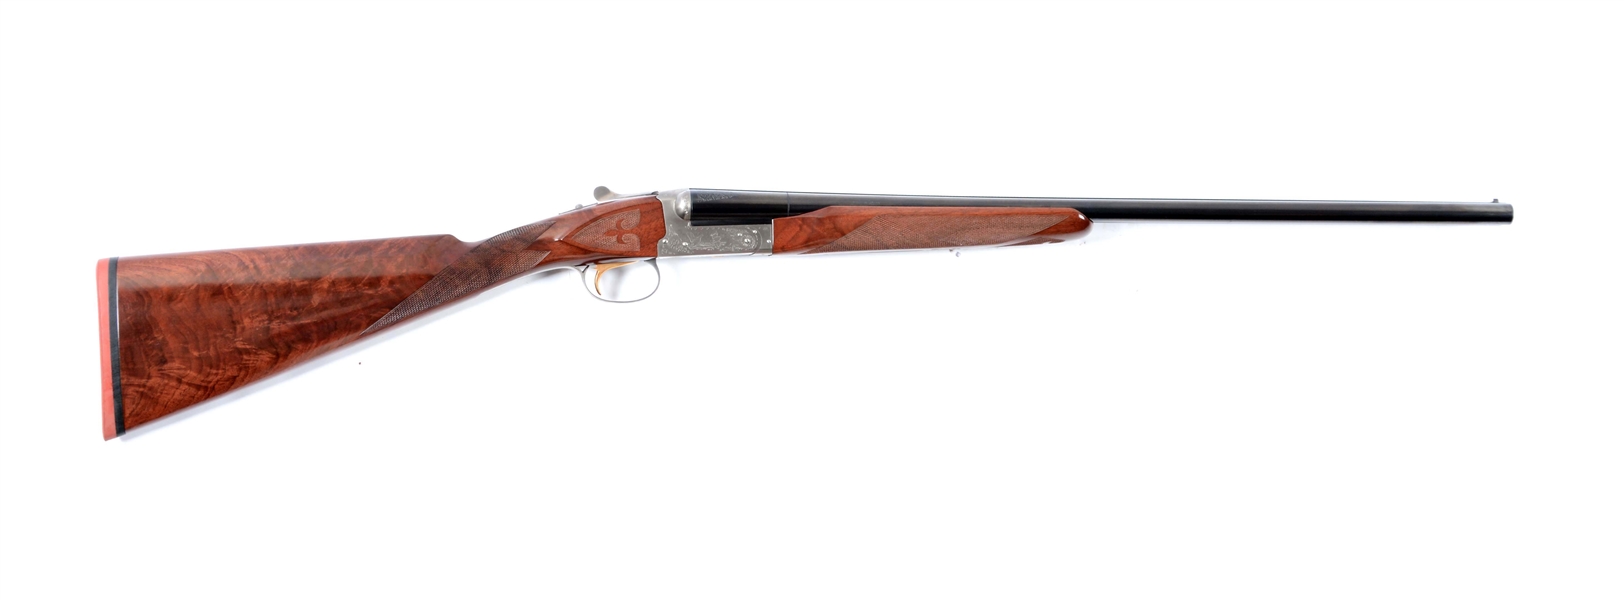 (M) CASED WINCHESTER MODEL 23 GOLDEN QUAIL LIMITED EDITION SIDE BY SIDE BOXLOCK SHOTGUN.